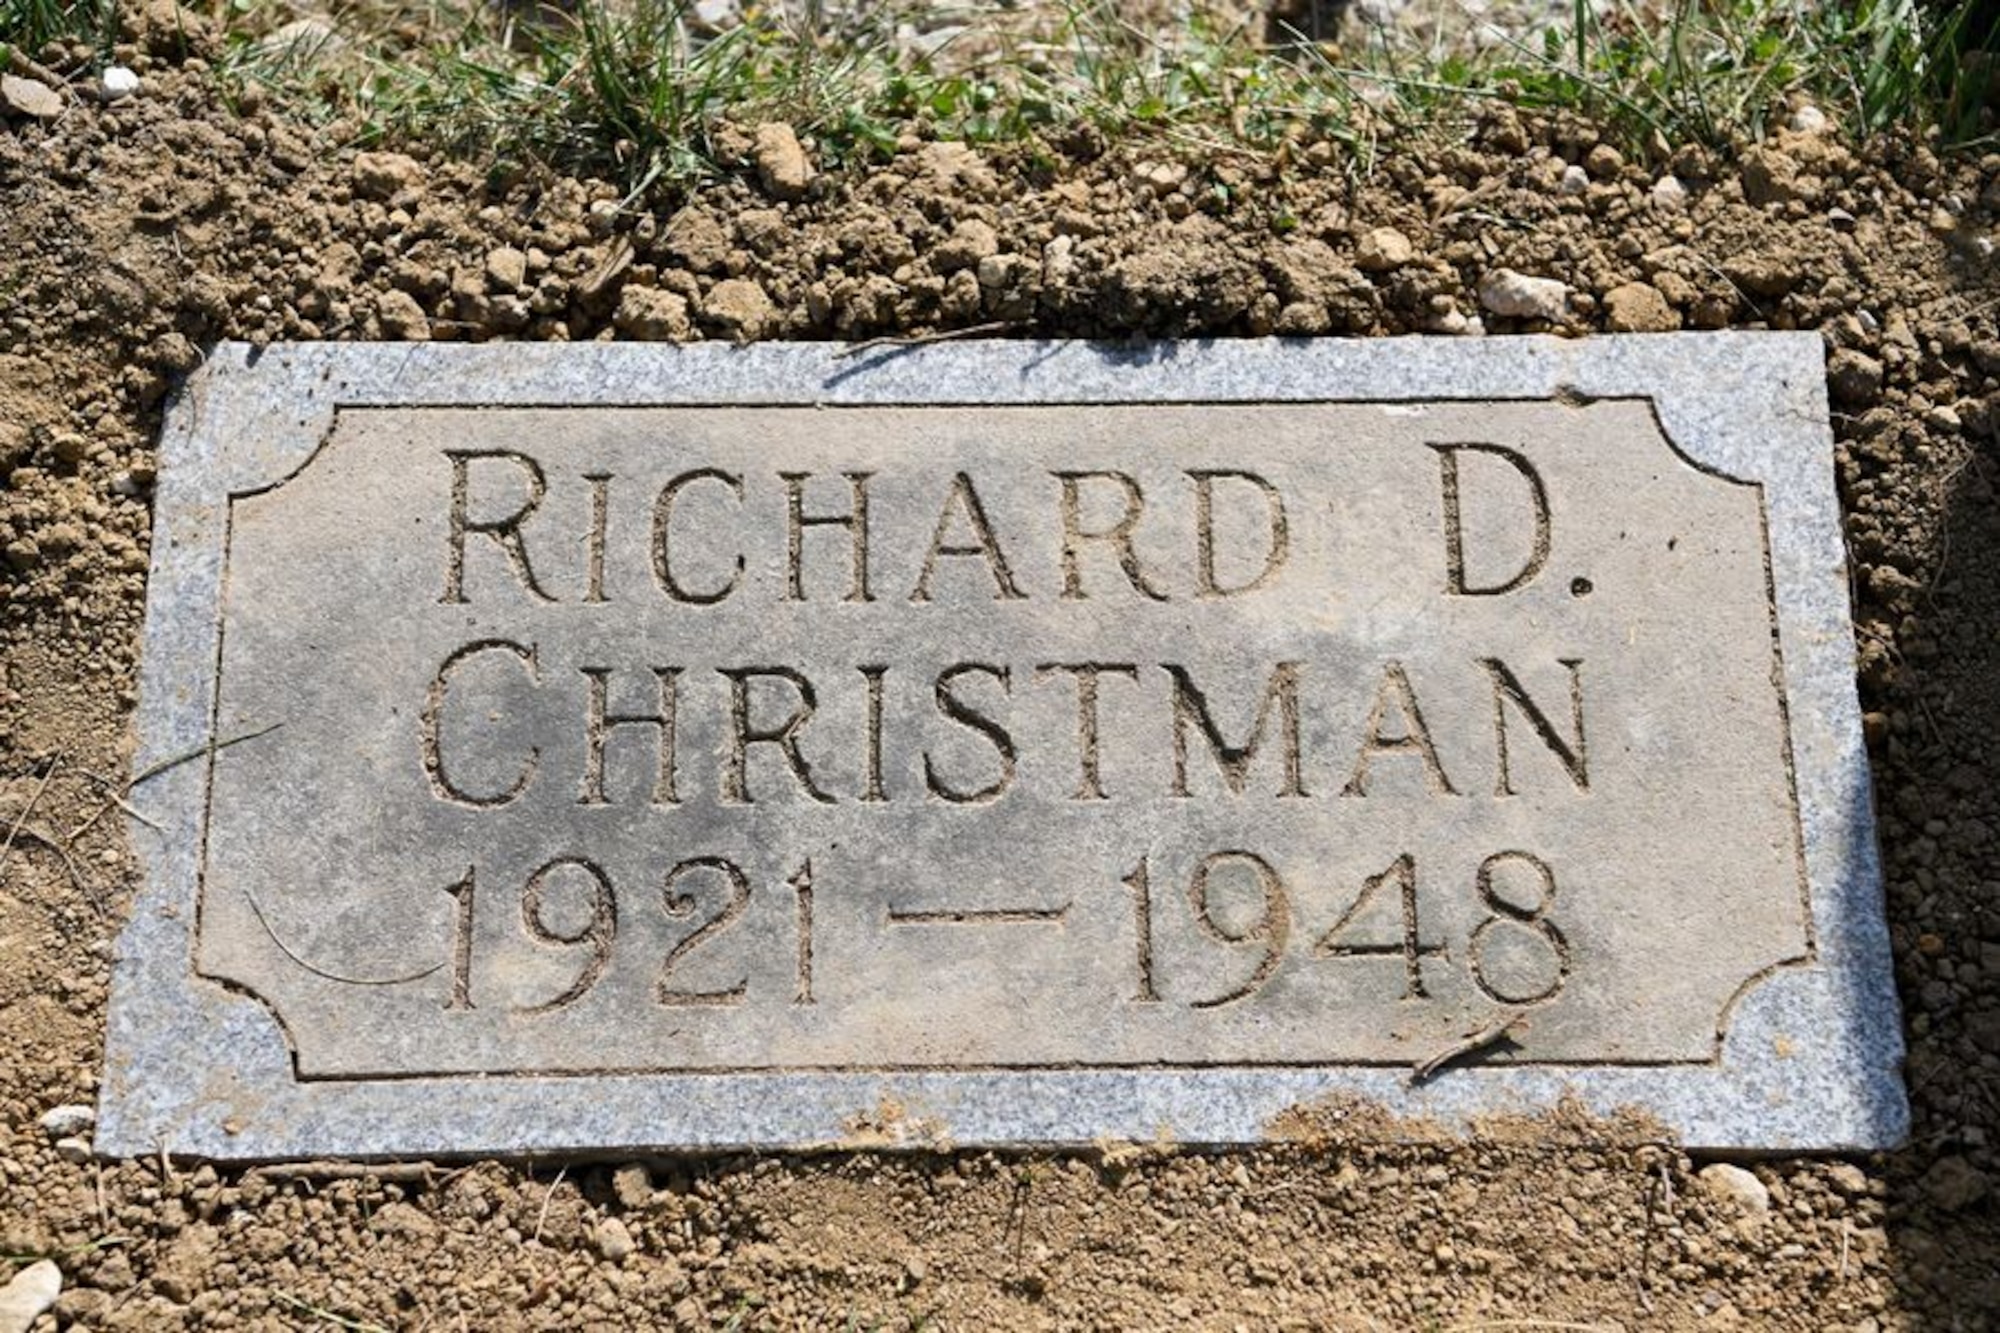 Tech. Sgt. Richard Herron, the base historian and an Airman assigned to the 162nd Operations Group, presents the new headstone for Lt. Richard Christman, a pilot assigned to the 162nd Fighter Squadron in 1948, September 4, 2020 at Dayton Memorial Park Cemetery in Dayton, Ohio. On September 4, 1948, Christman was flying a routine navigational training mission above Dayton, Ohio when his F-51’s left wing broke off of the aircraft at several thousand feet in the air. The F-51 crashed and 27-year-old Christman died in the crash. (U.S. Air National Guard photo by Staff Sgt. Amber Mullen)